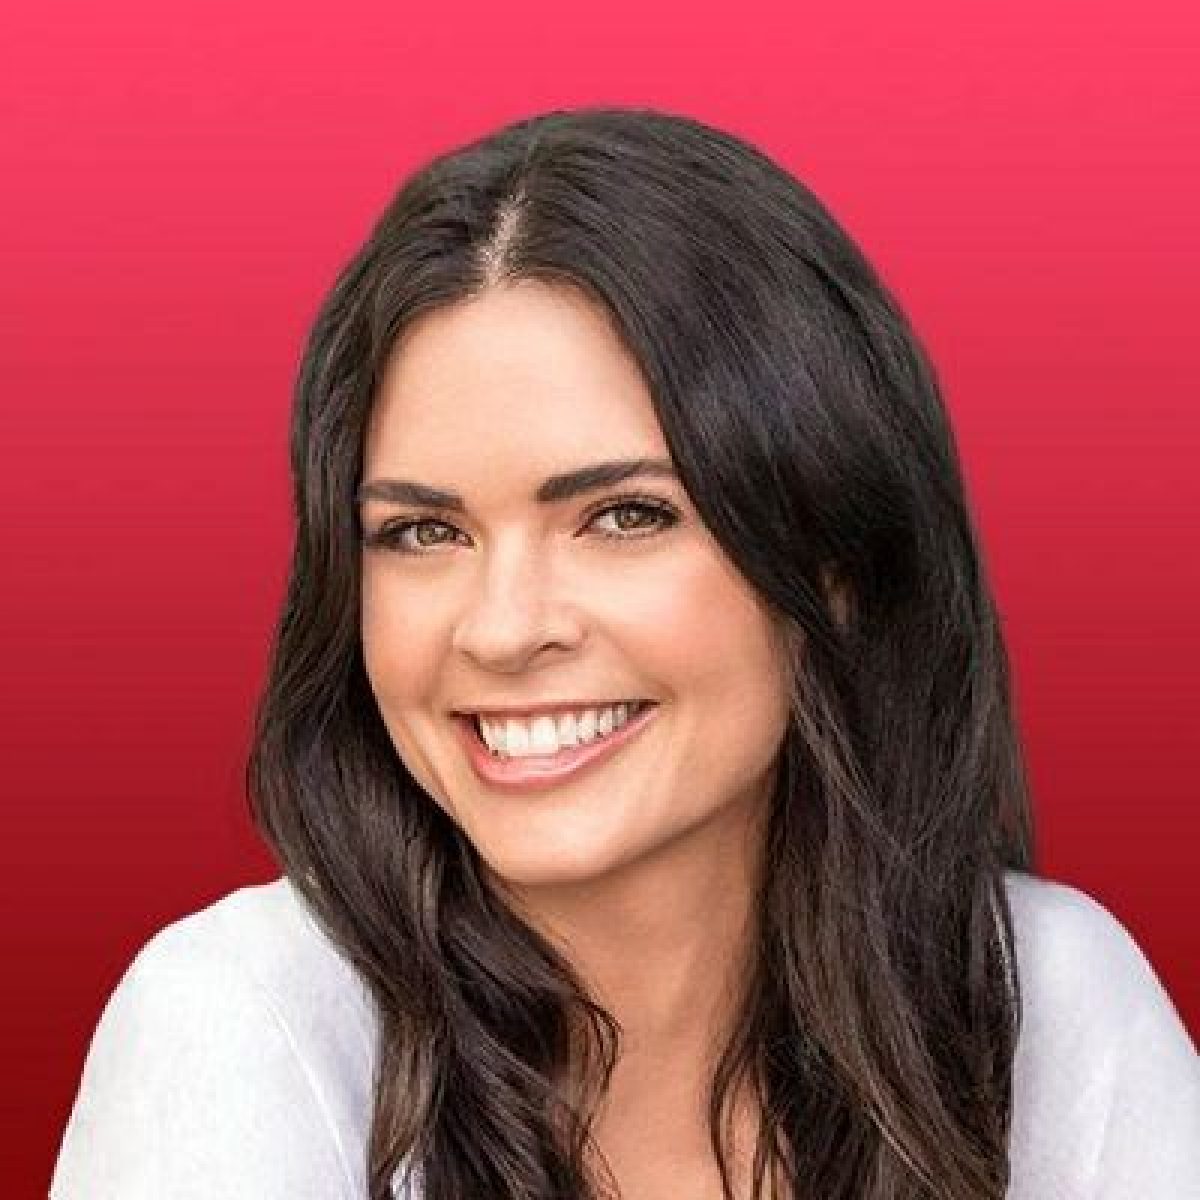 Katie Lee - Bio, Age, Net Worth, Height, In Relation, Facts, Career